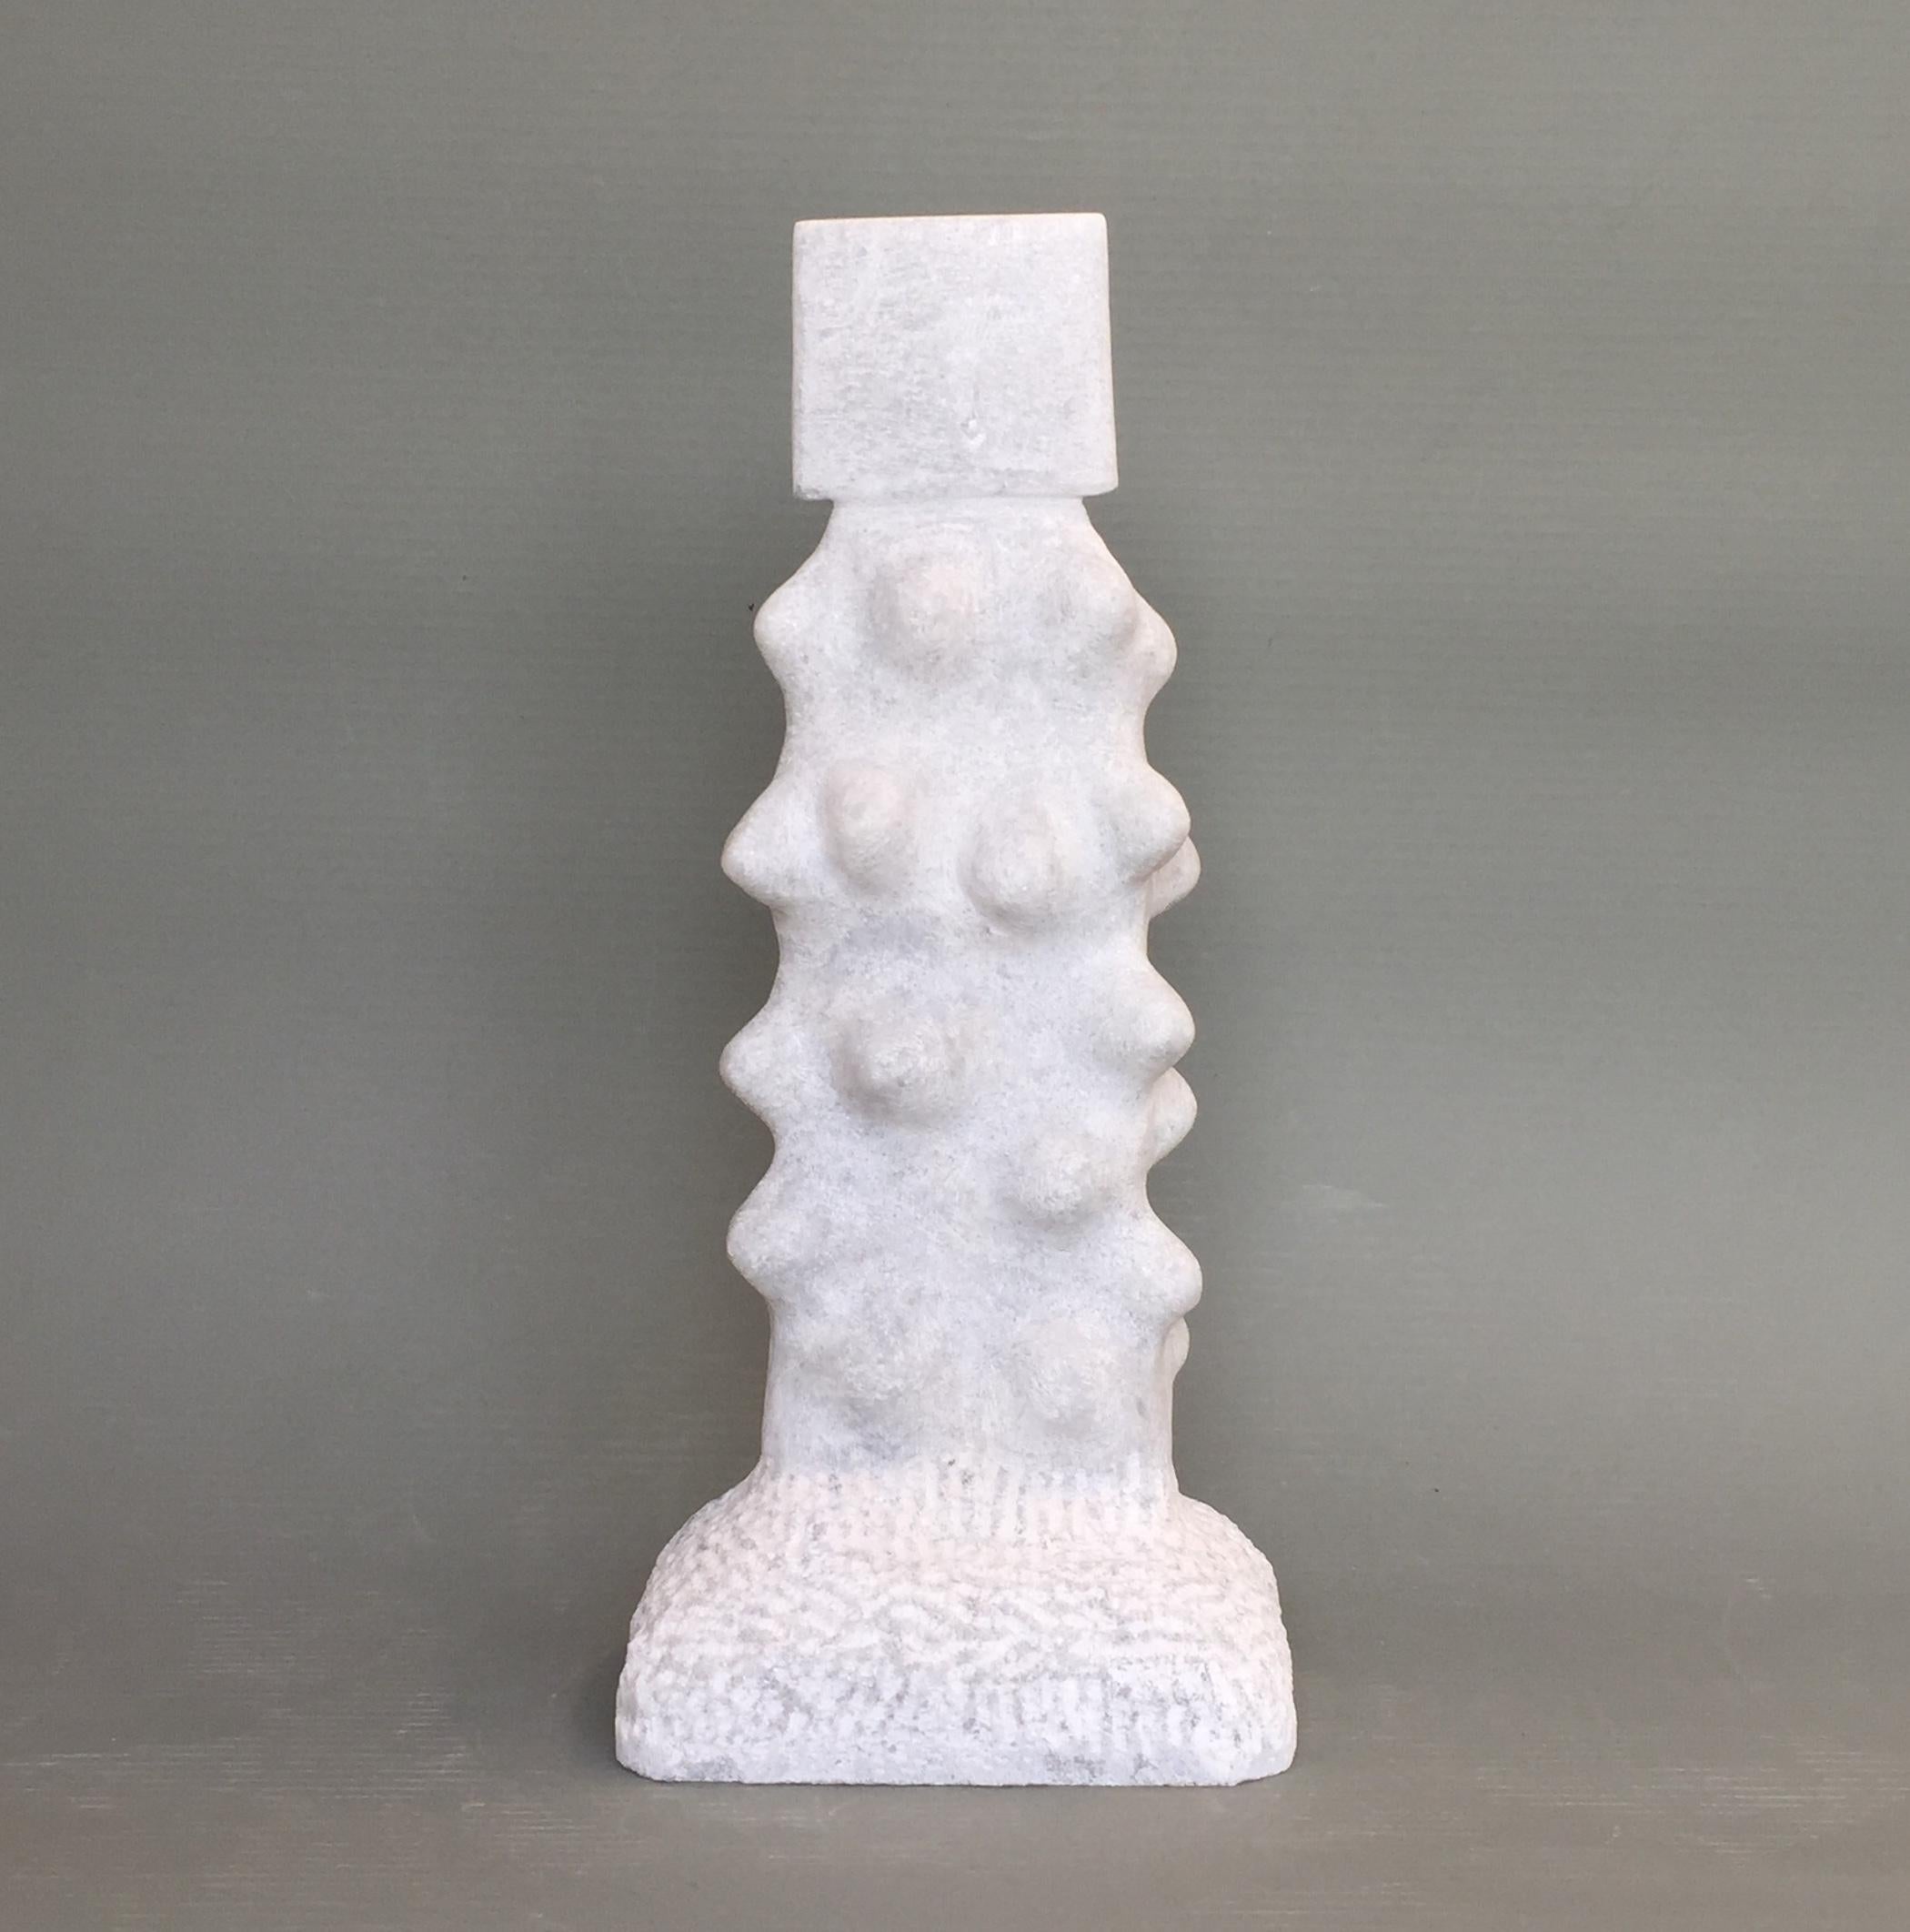 February contemporary marble sculpture by Tom Von Kaenel.
Dimensions: D 13.5 x W 17.5 x H 43 cm.
Materials: marble

All the artworks of Tom von Kaenel are unique, handcrafted by himself.
The stones all come from the surrounding marble quarries